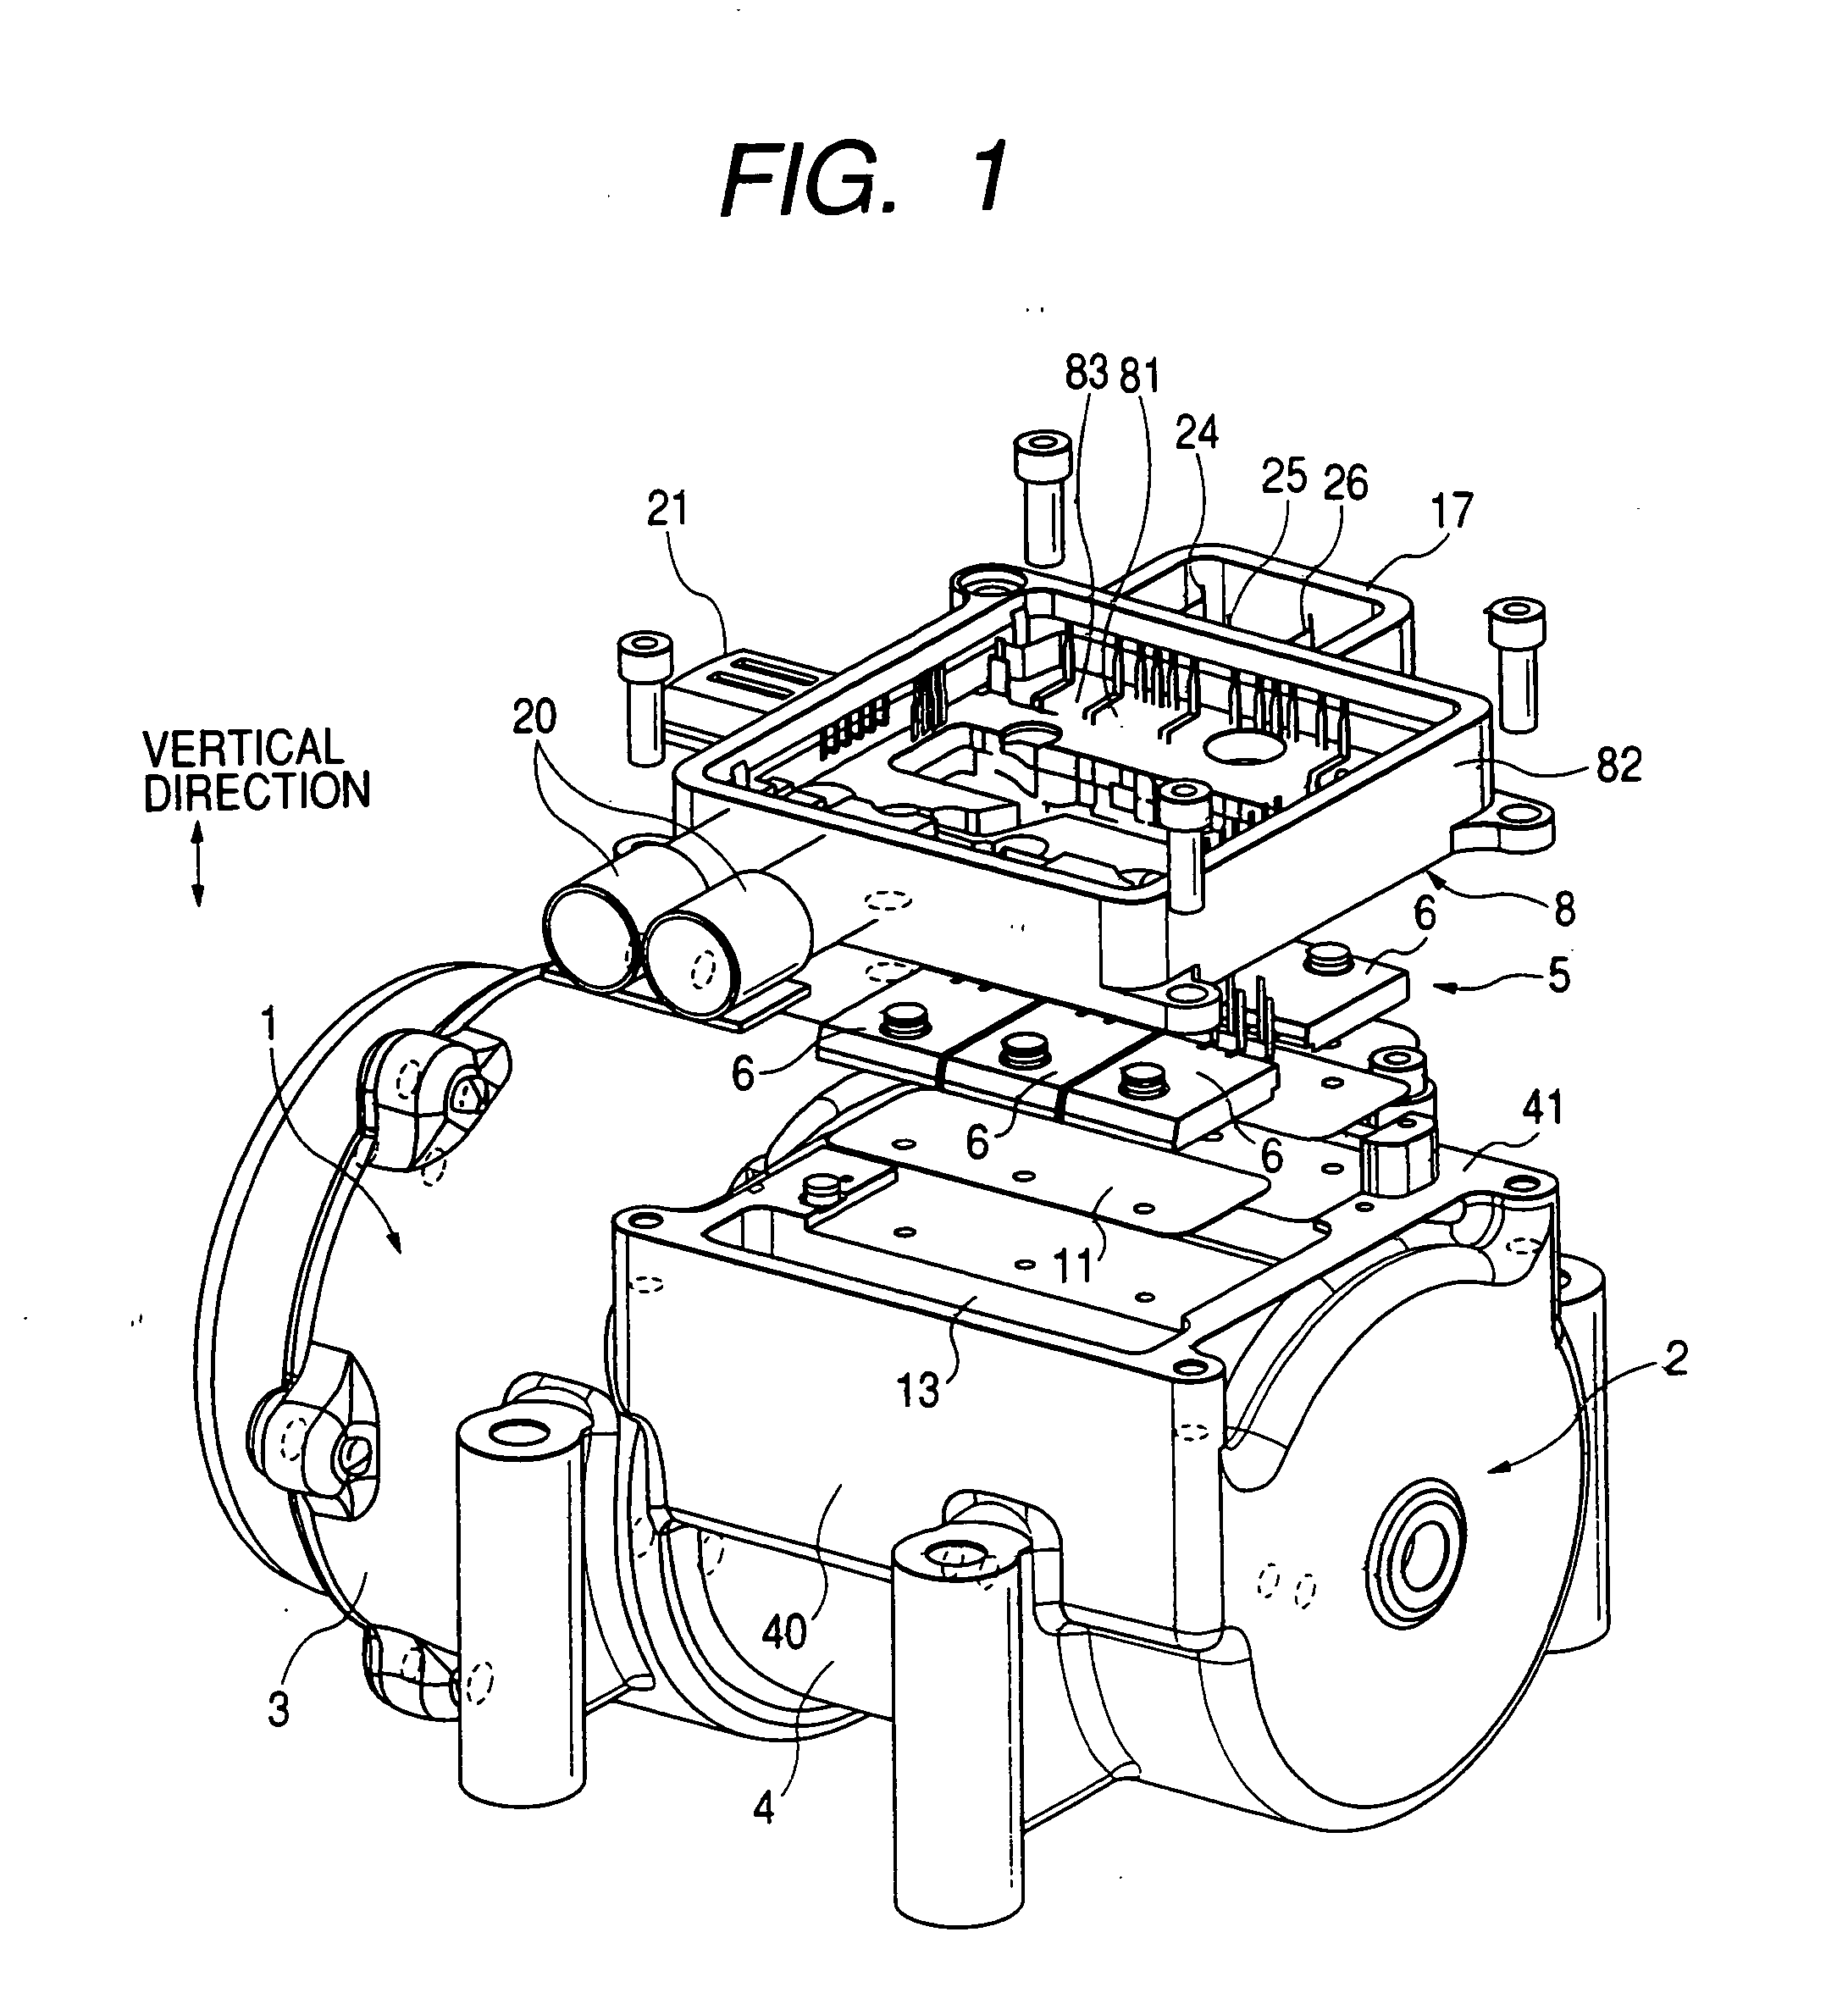 Inverter-integrated motor for an automotive vehicle